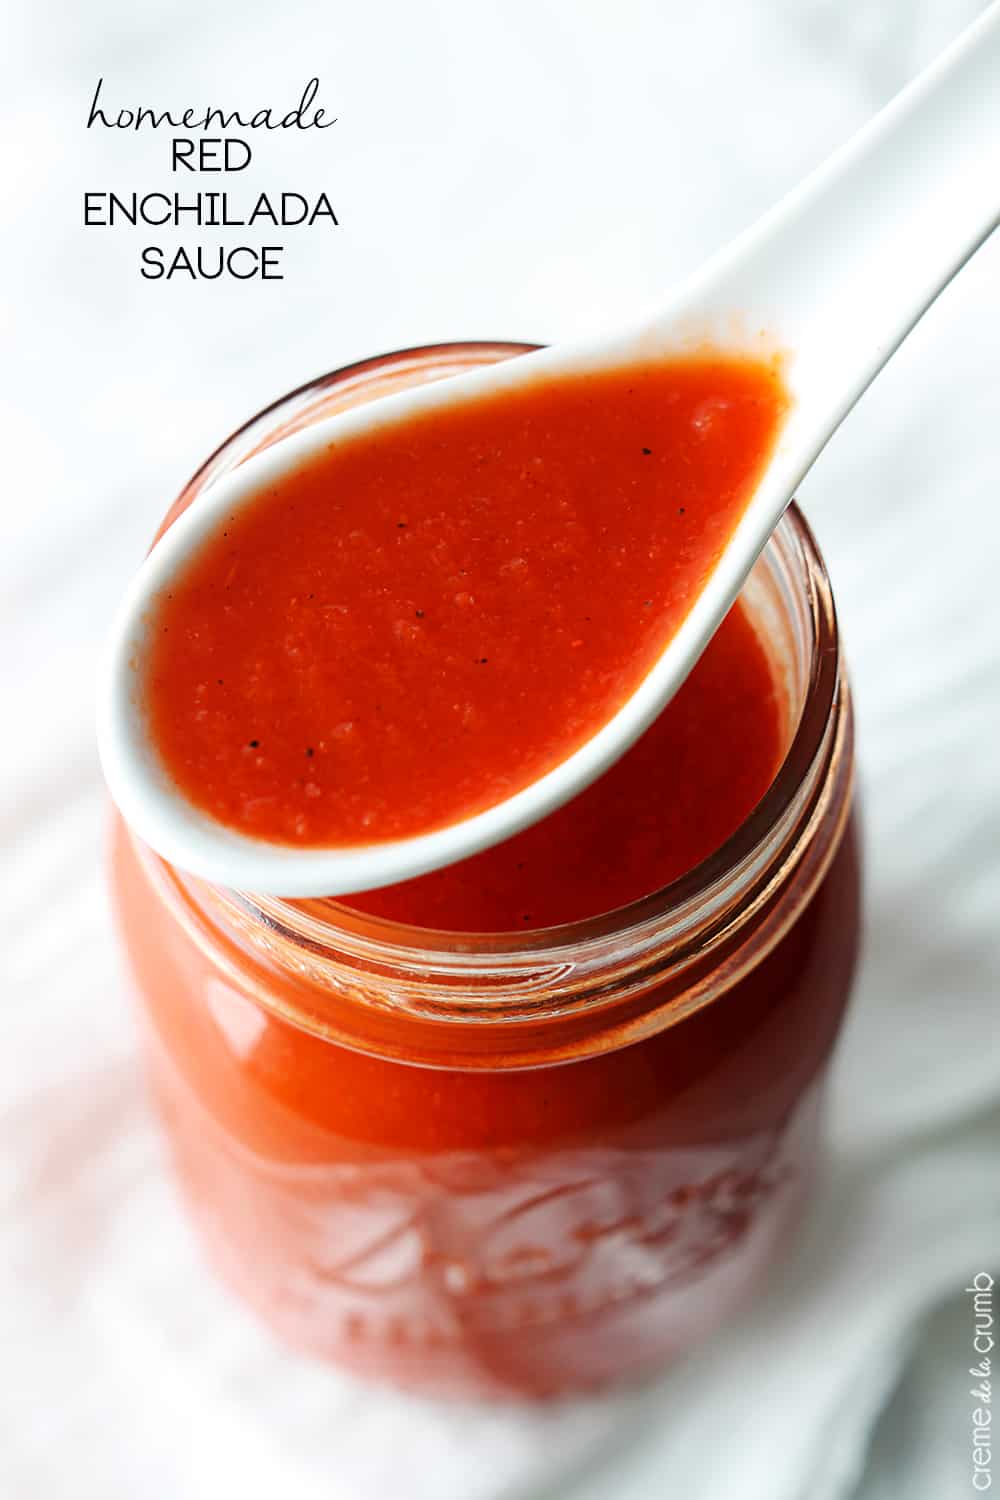 top view of a spoon full of homemade red enchilada sauce on top of a mason jar with sauce in it with the title of the recipe written on the top left corner of the image.